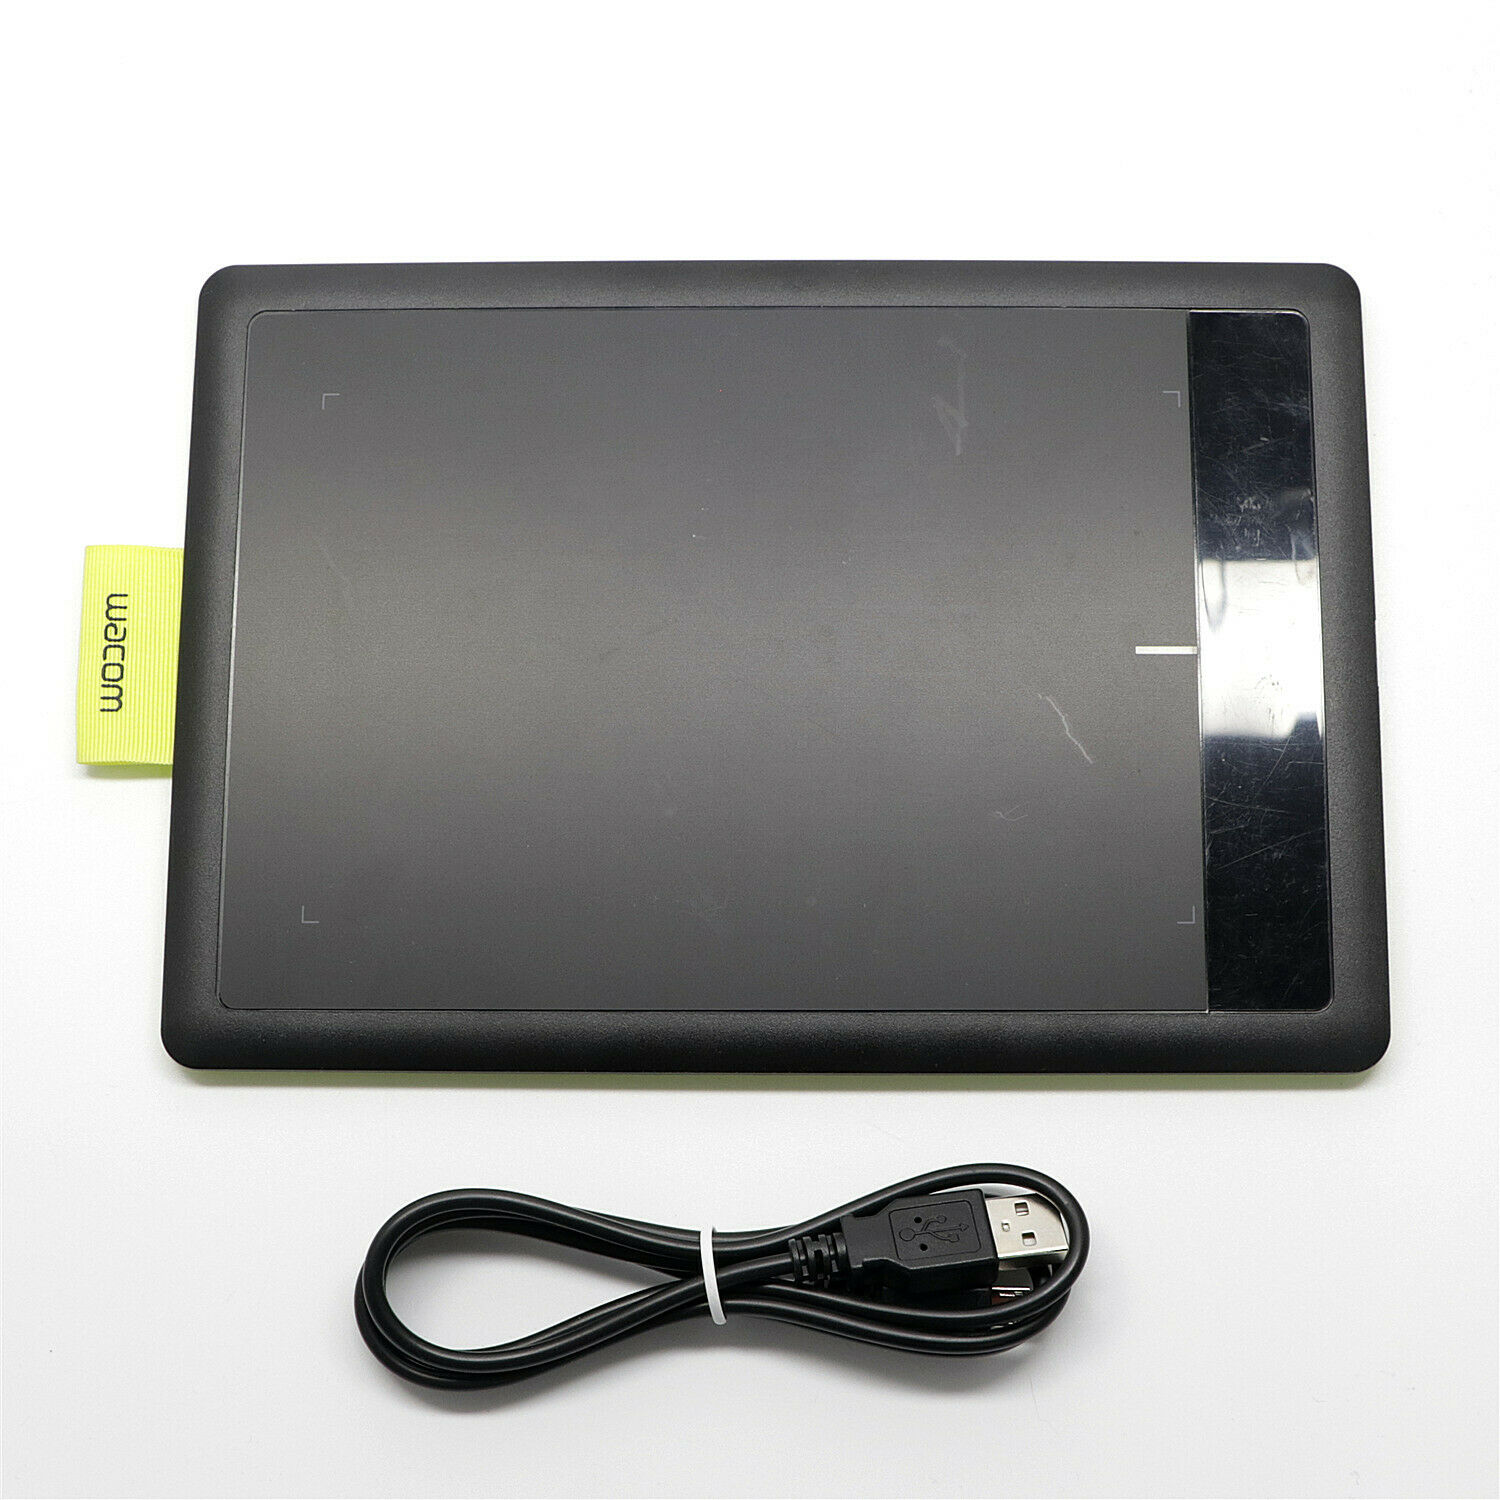 Wacom CTL471 Bamboo Splash Pen Small Tablet CTL471 Drawing Tablet(Only table)